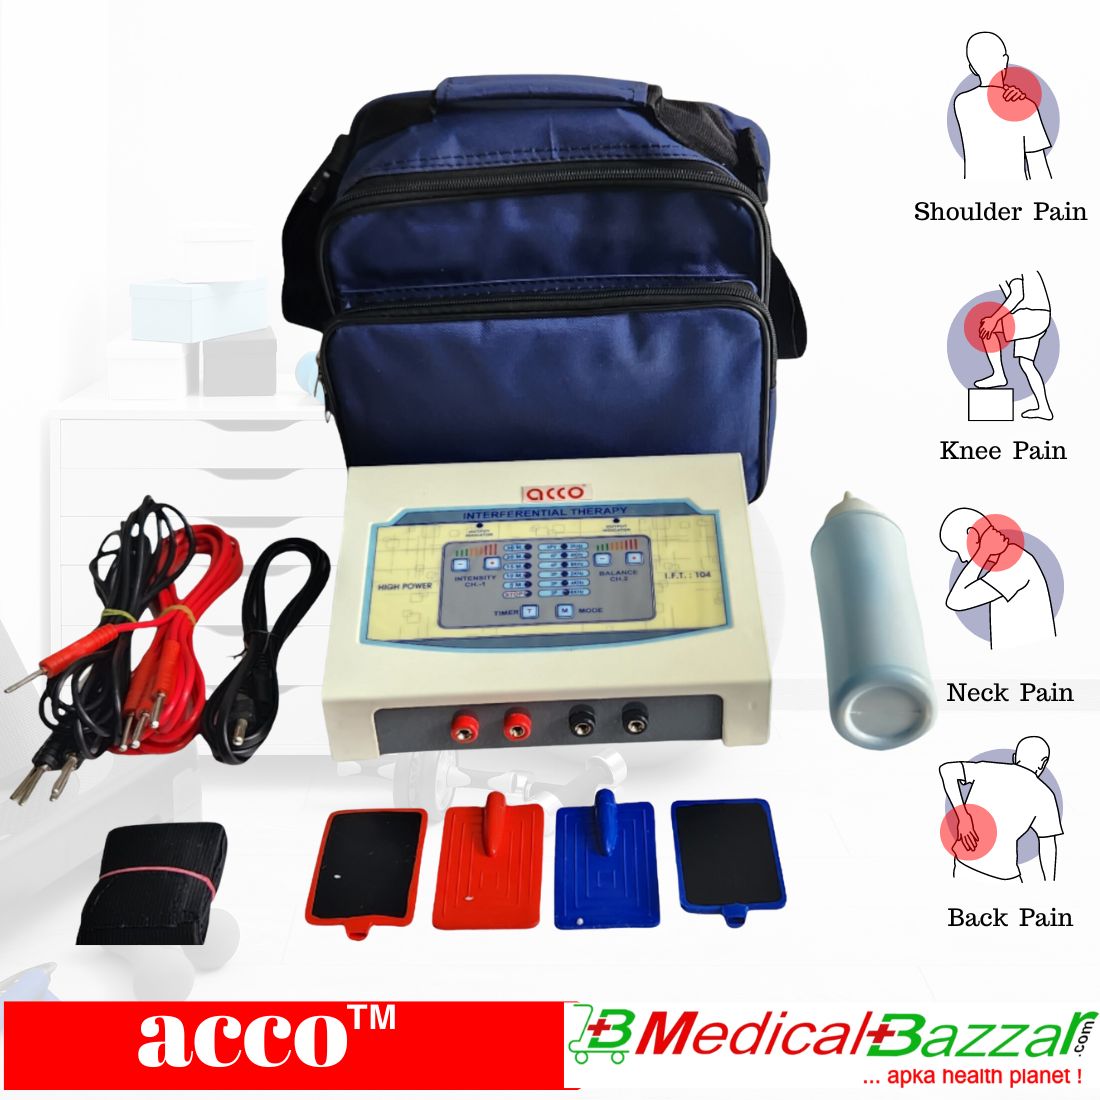 acco Interferential Therapy Machine /IFT